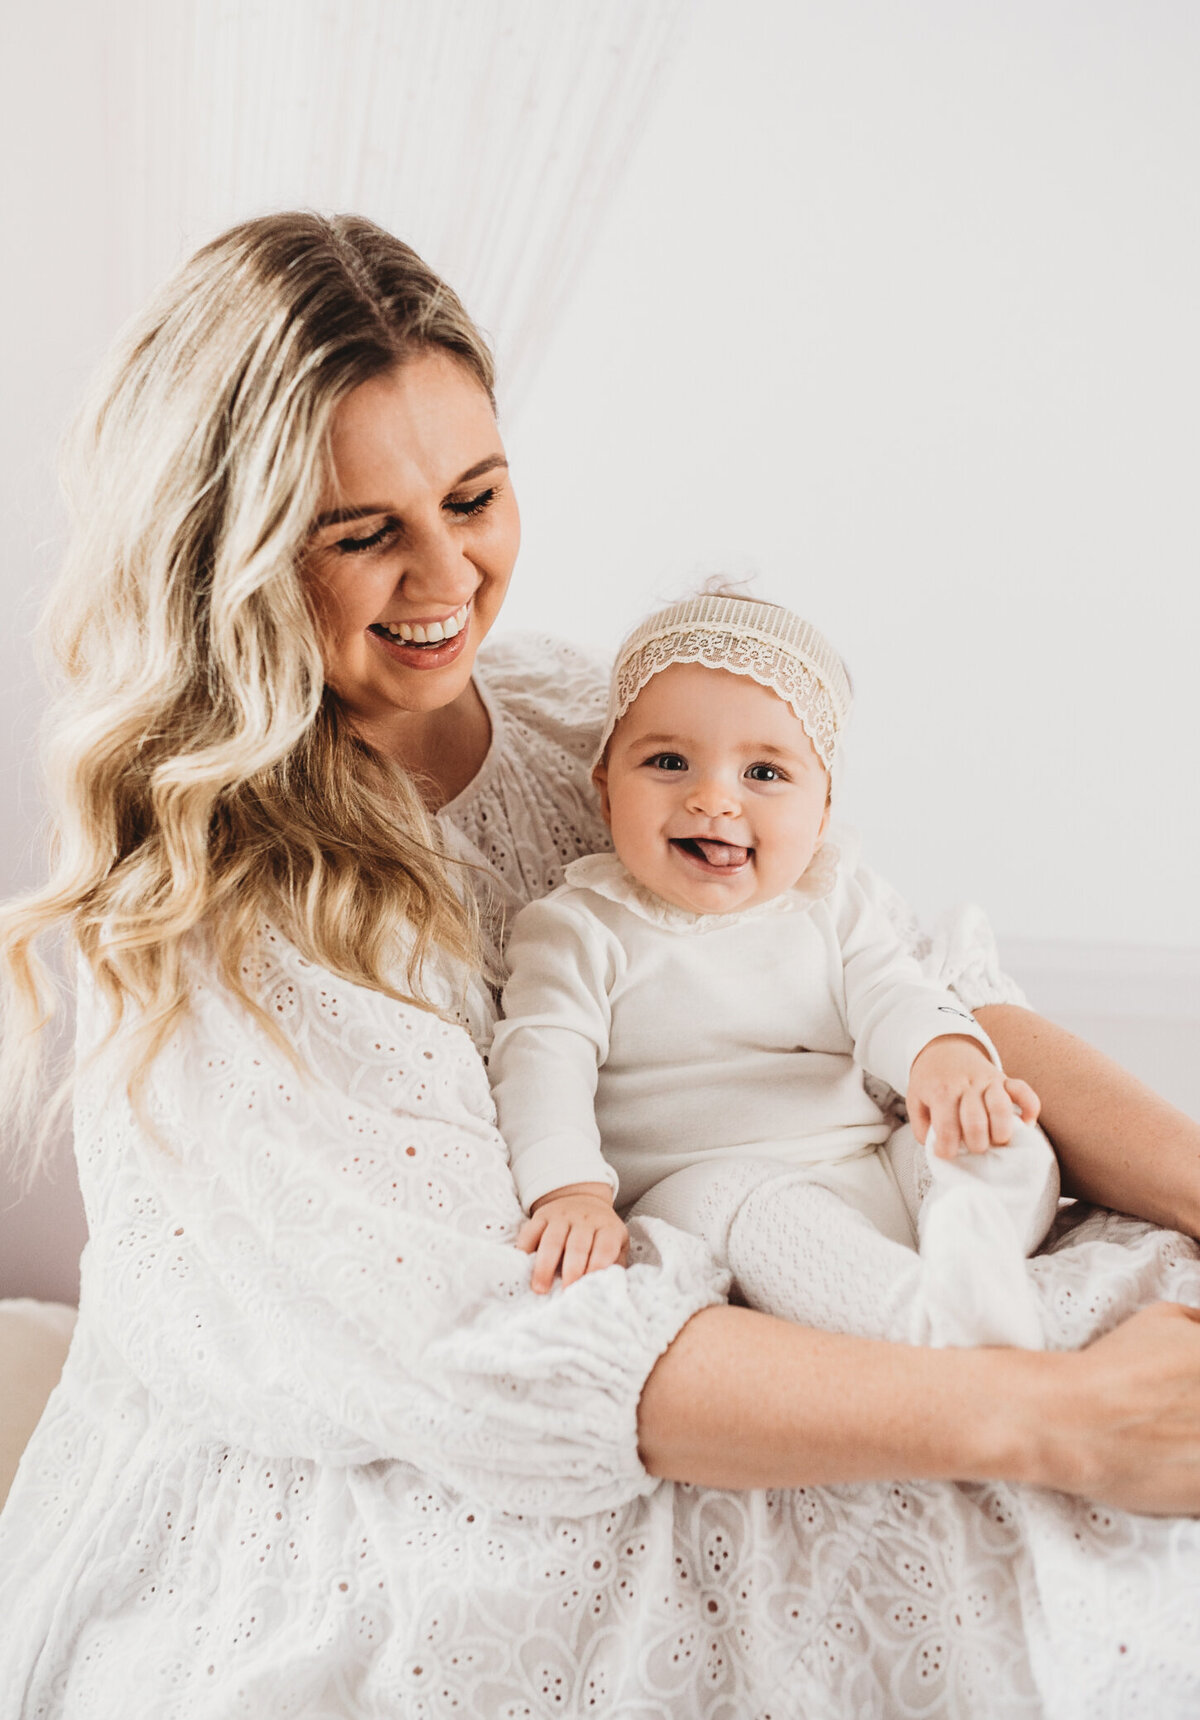 baby and mumu enjoying laughter in studio session, baby phortography Perth | gracie and the wren